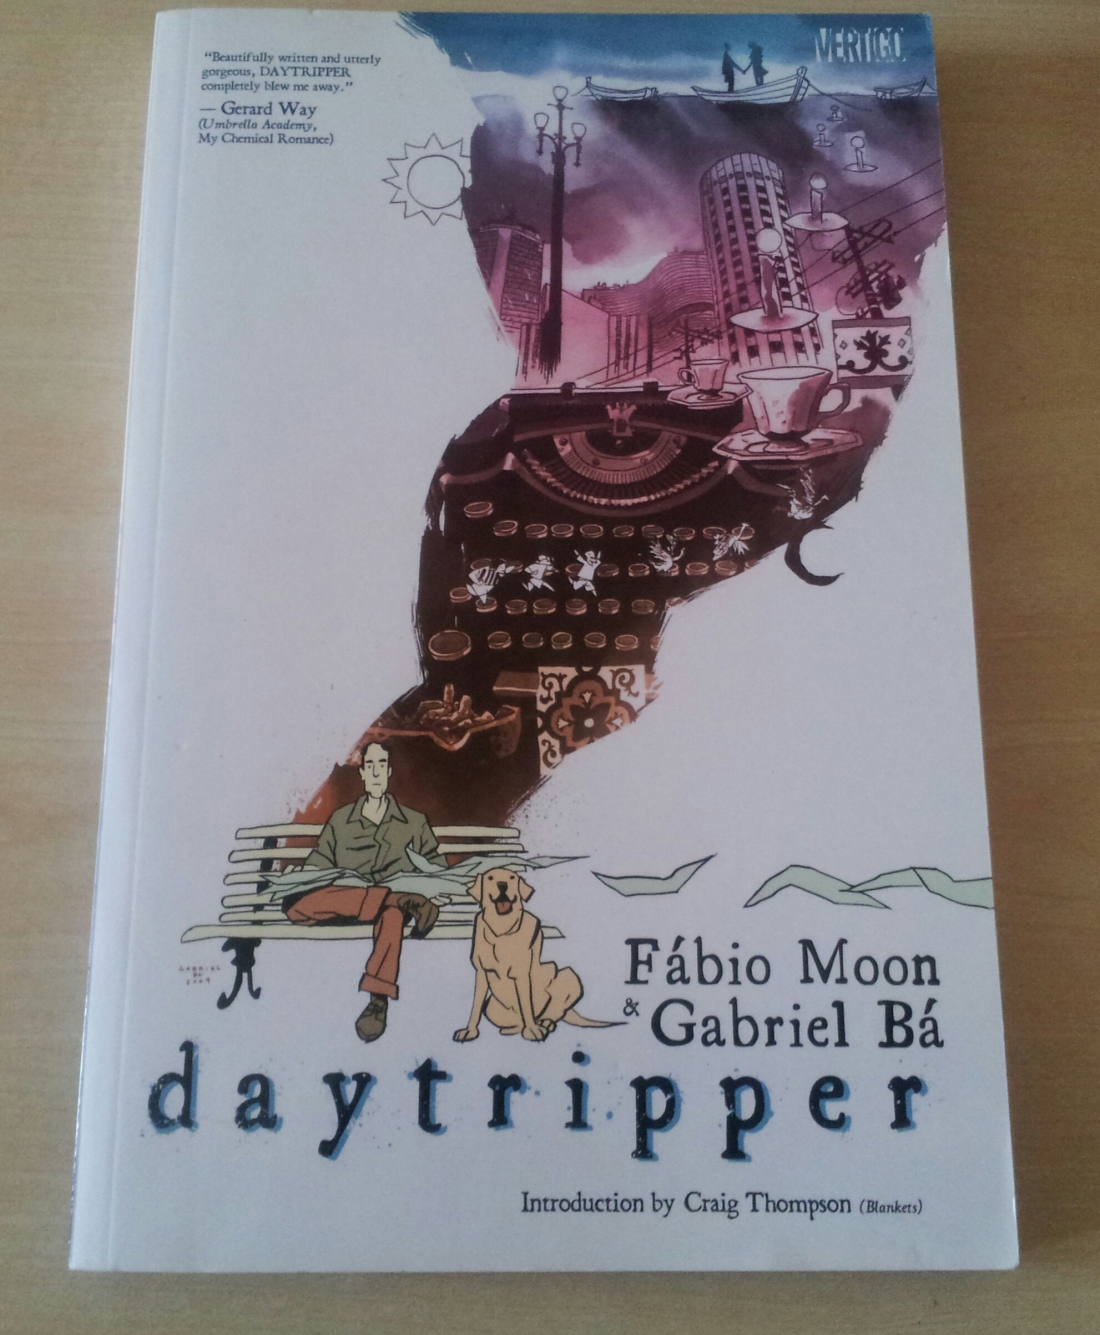 Recent Comic Purchases - Daytripper